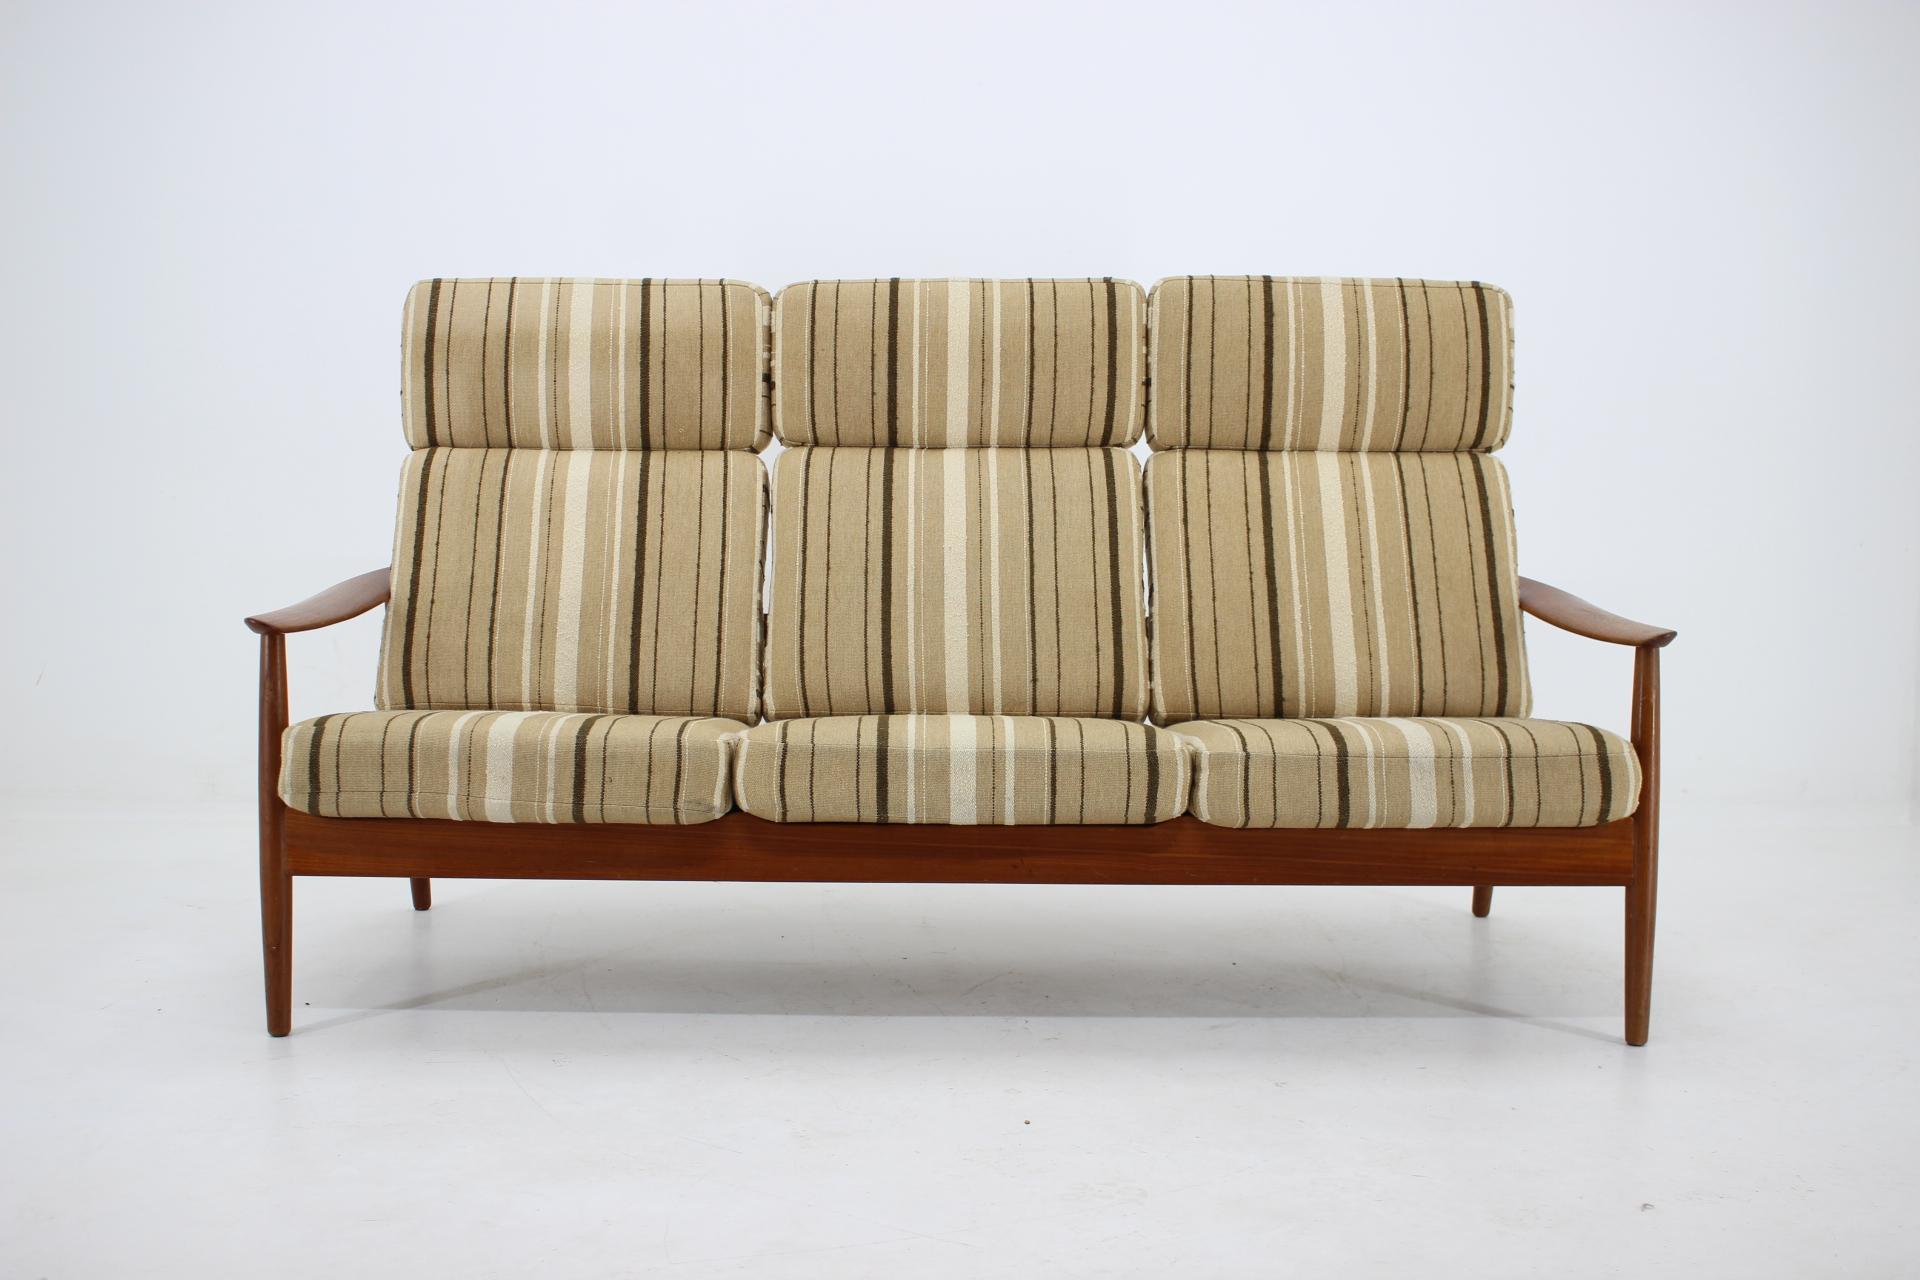 - Teak
- Very elegant and comfortable
- Marked
- High back.